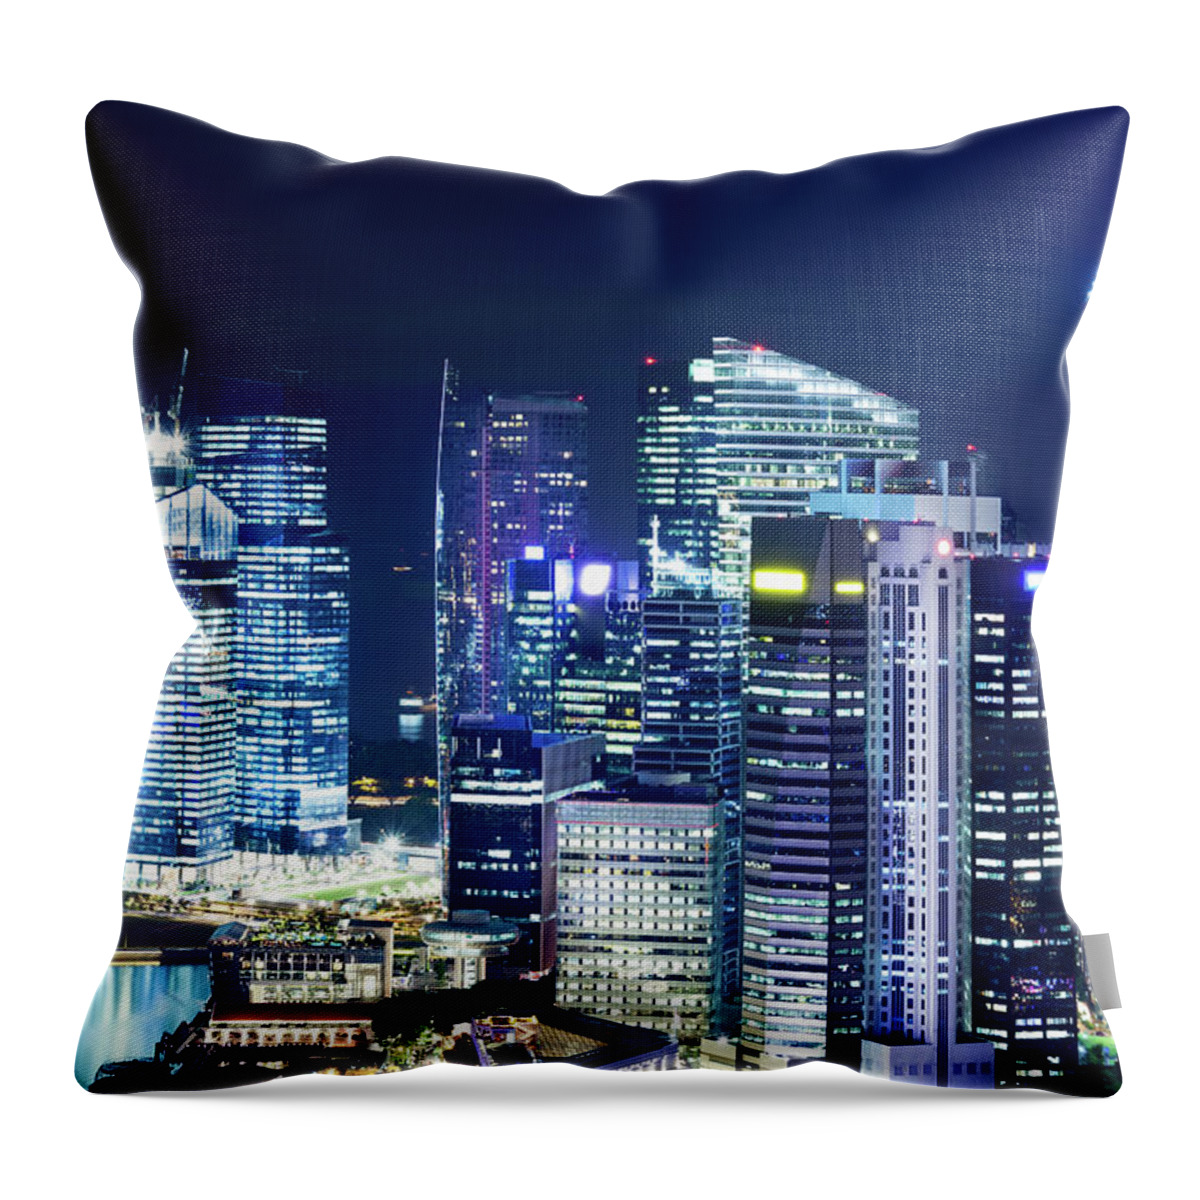 Downtown District Throw Pillow featuring the photograph Central Business District, Singapore by Tomml